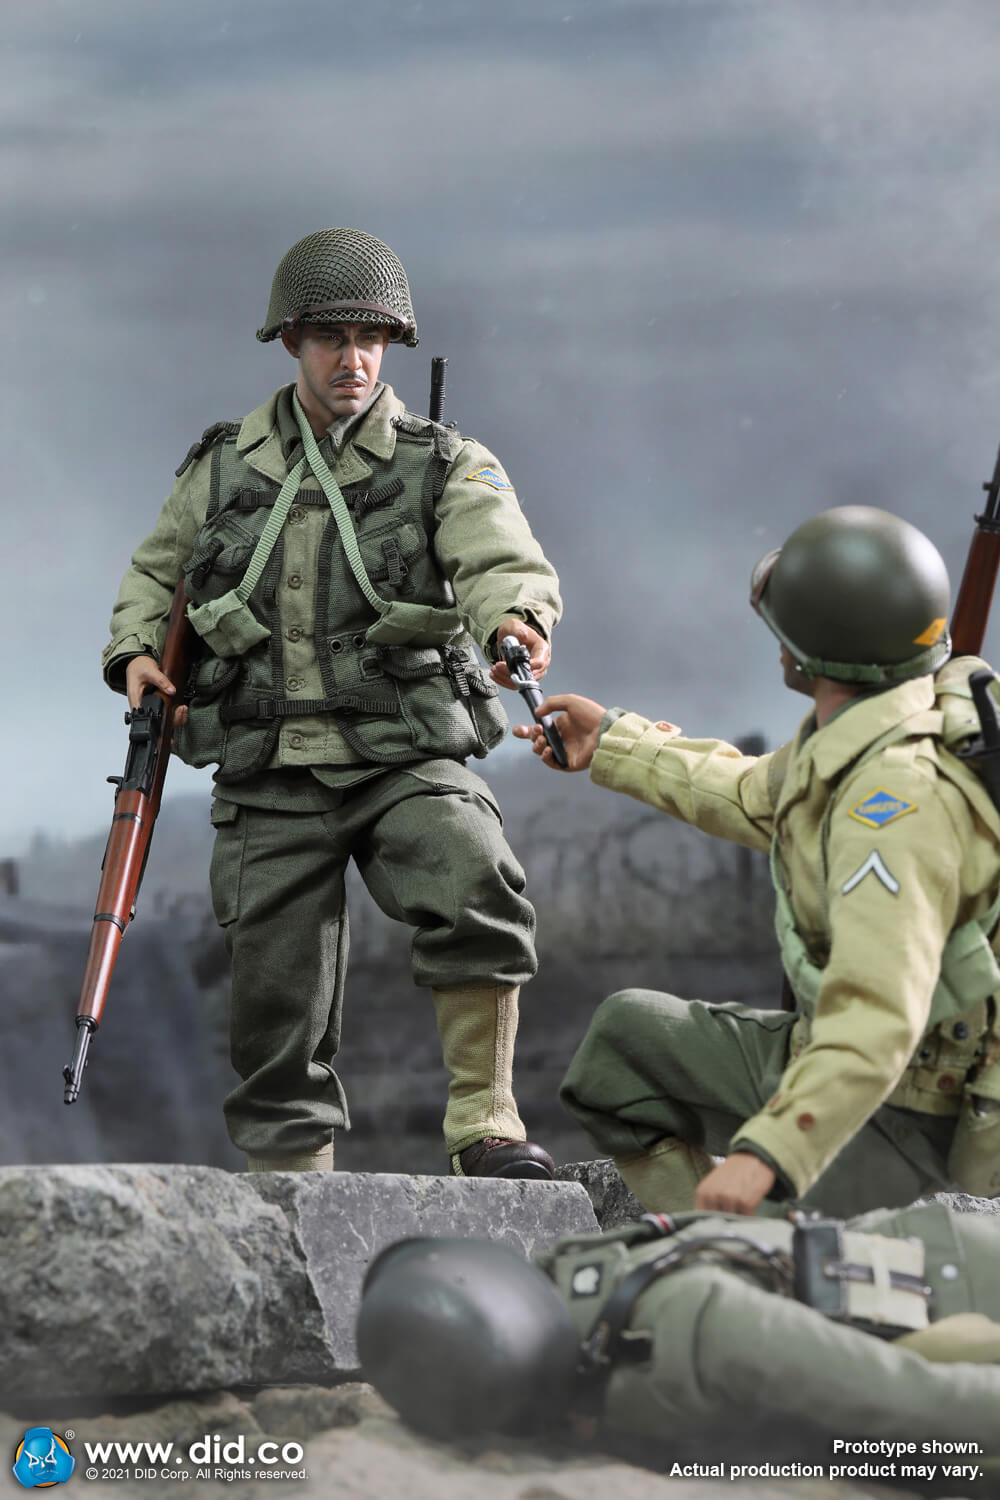 movie-based - NEW PRODUCT: DiD: A80155  WWII US 2nd Ranger Battalion Series 6 – Private Mellish 17276